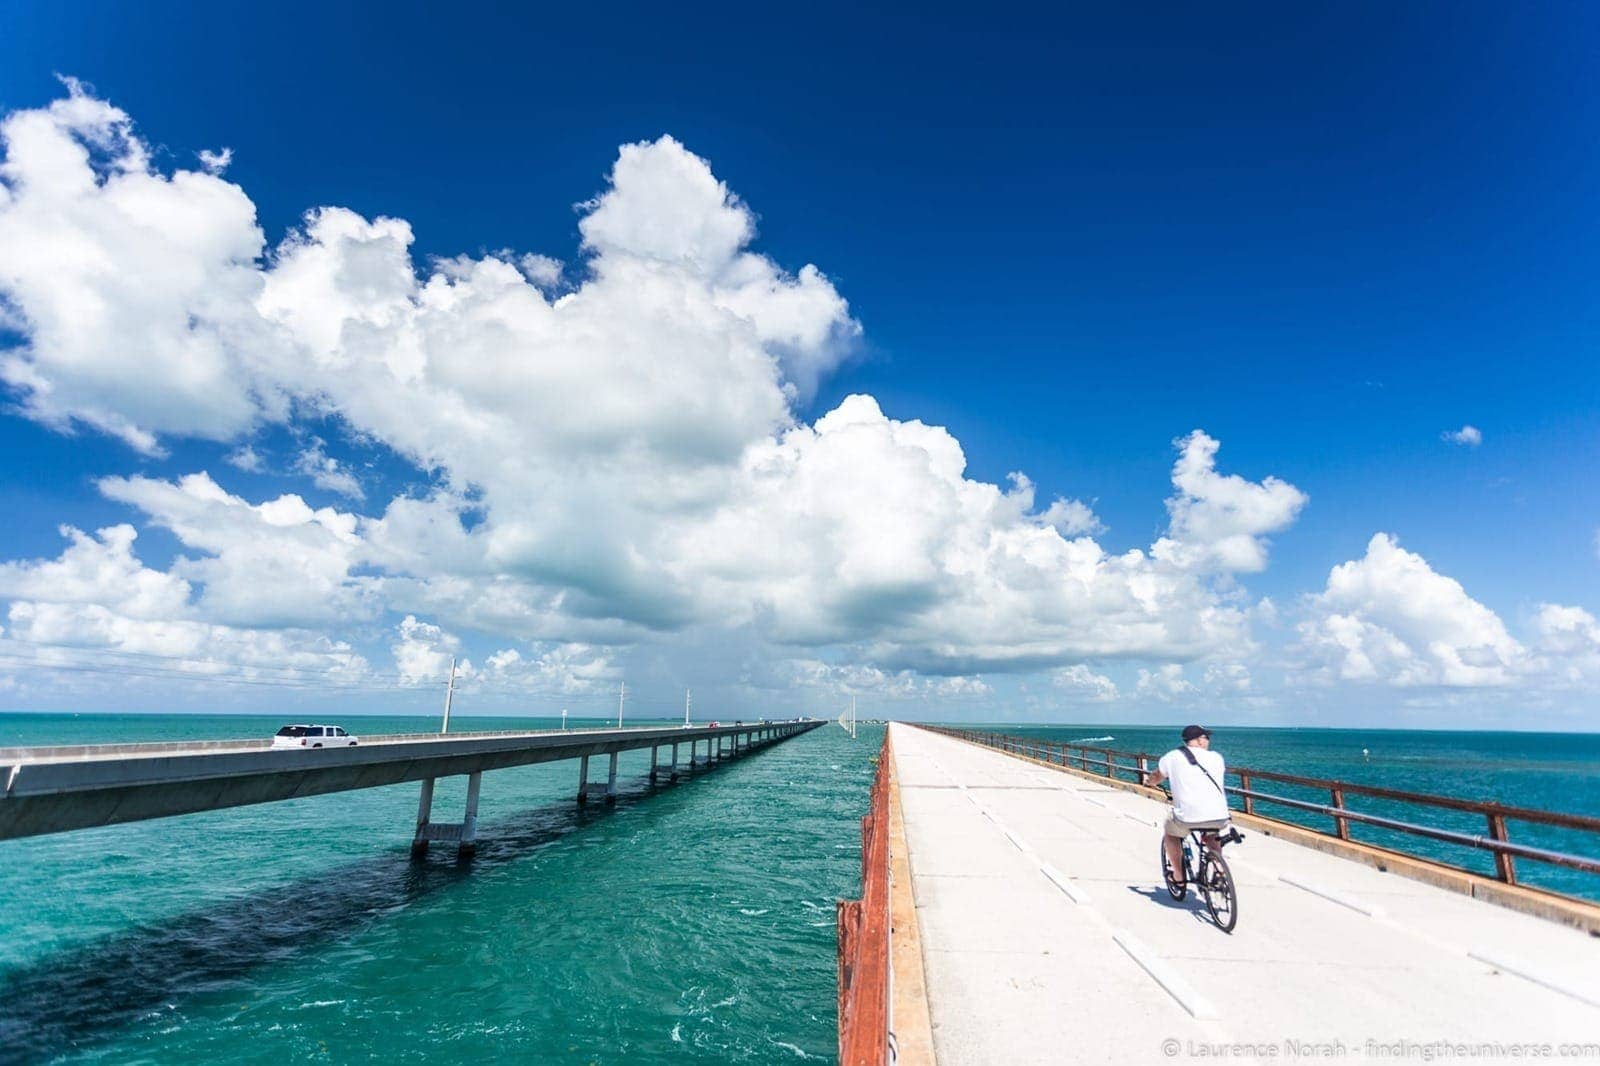 Cycling in the Florida Key